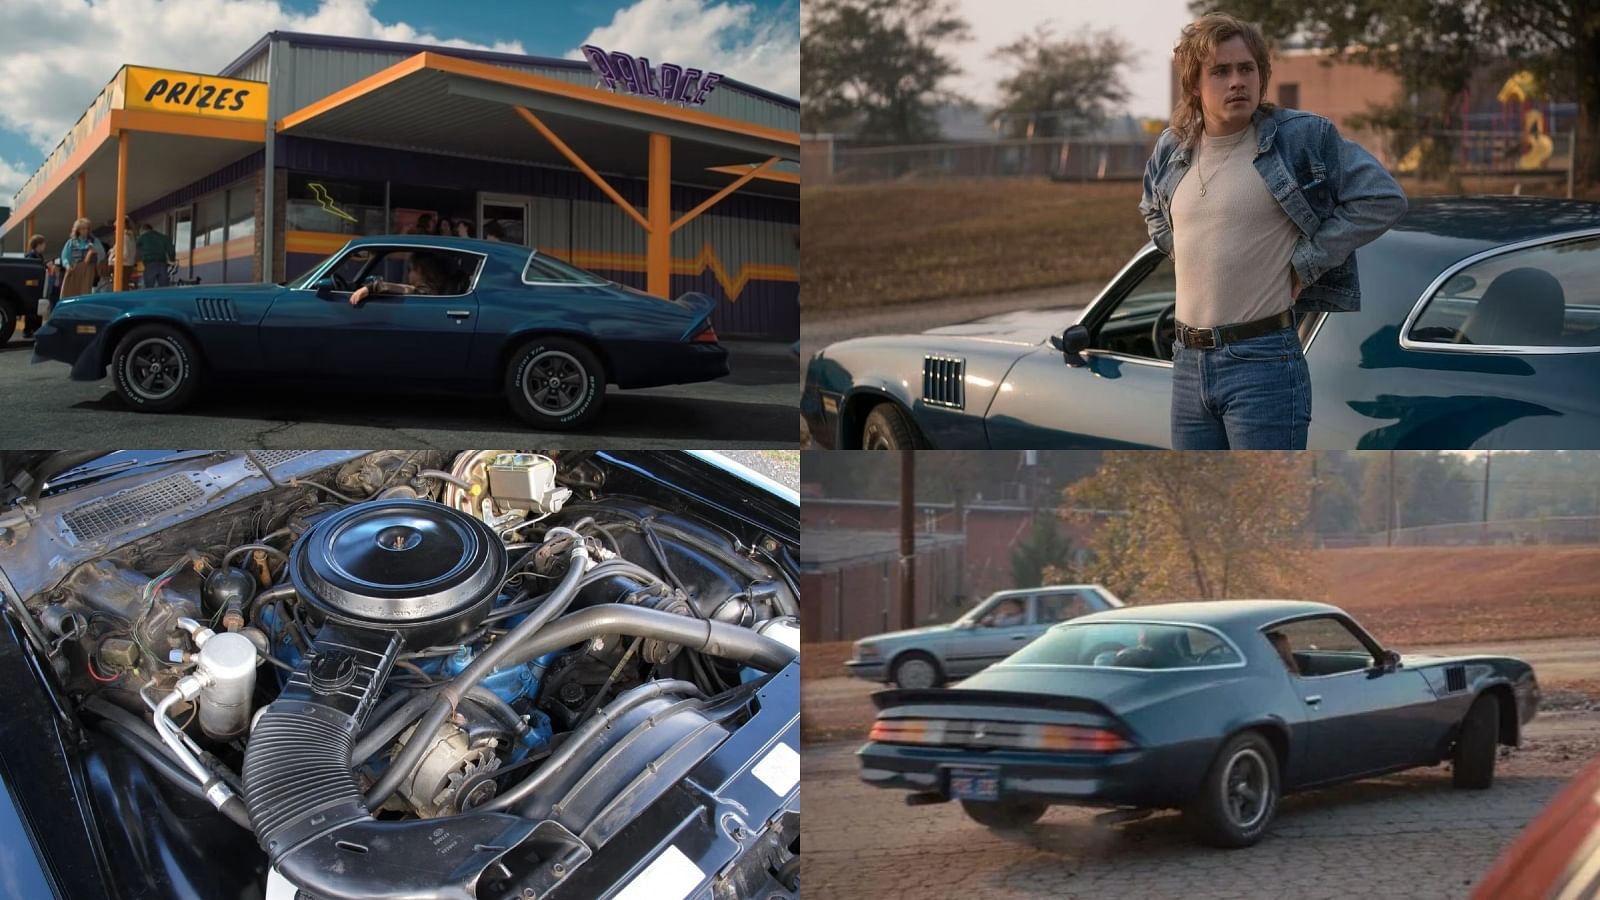 1979 Chevrolet Camaro Z-28 used by Billy Hargrove,  its engine